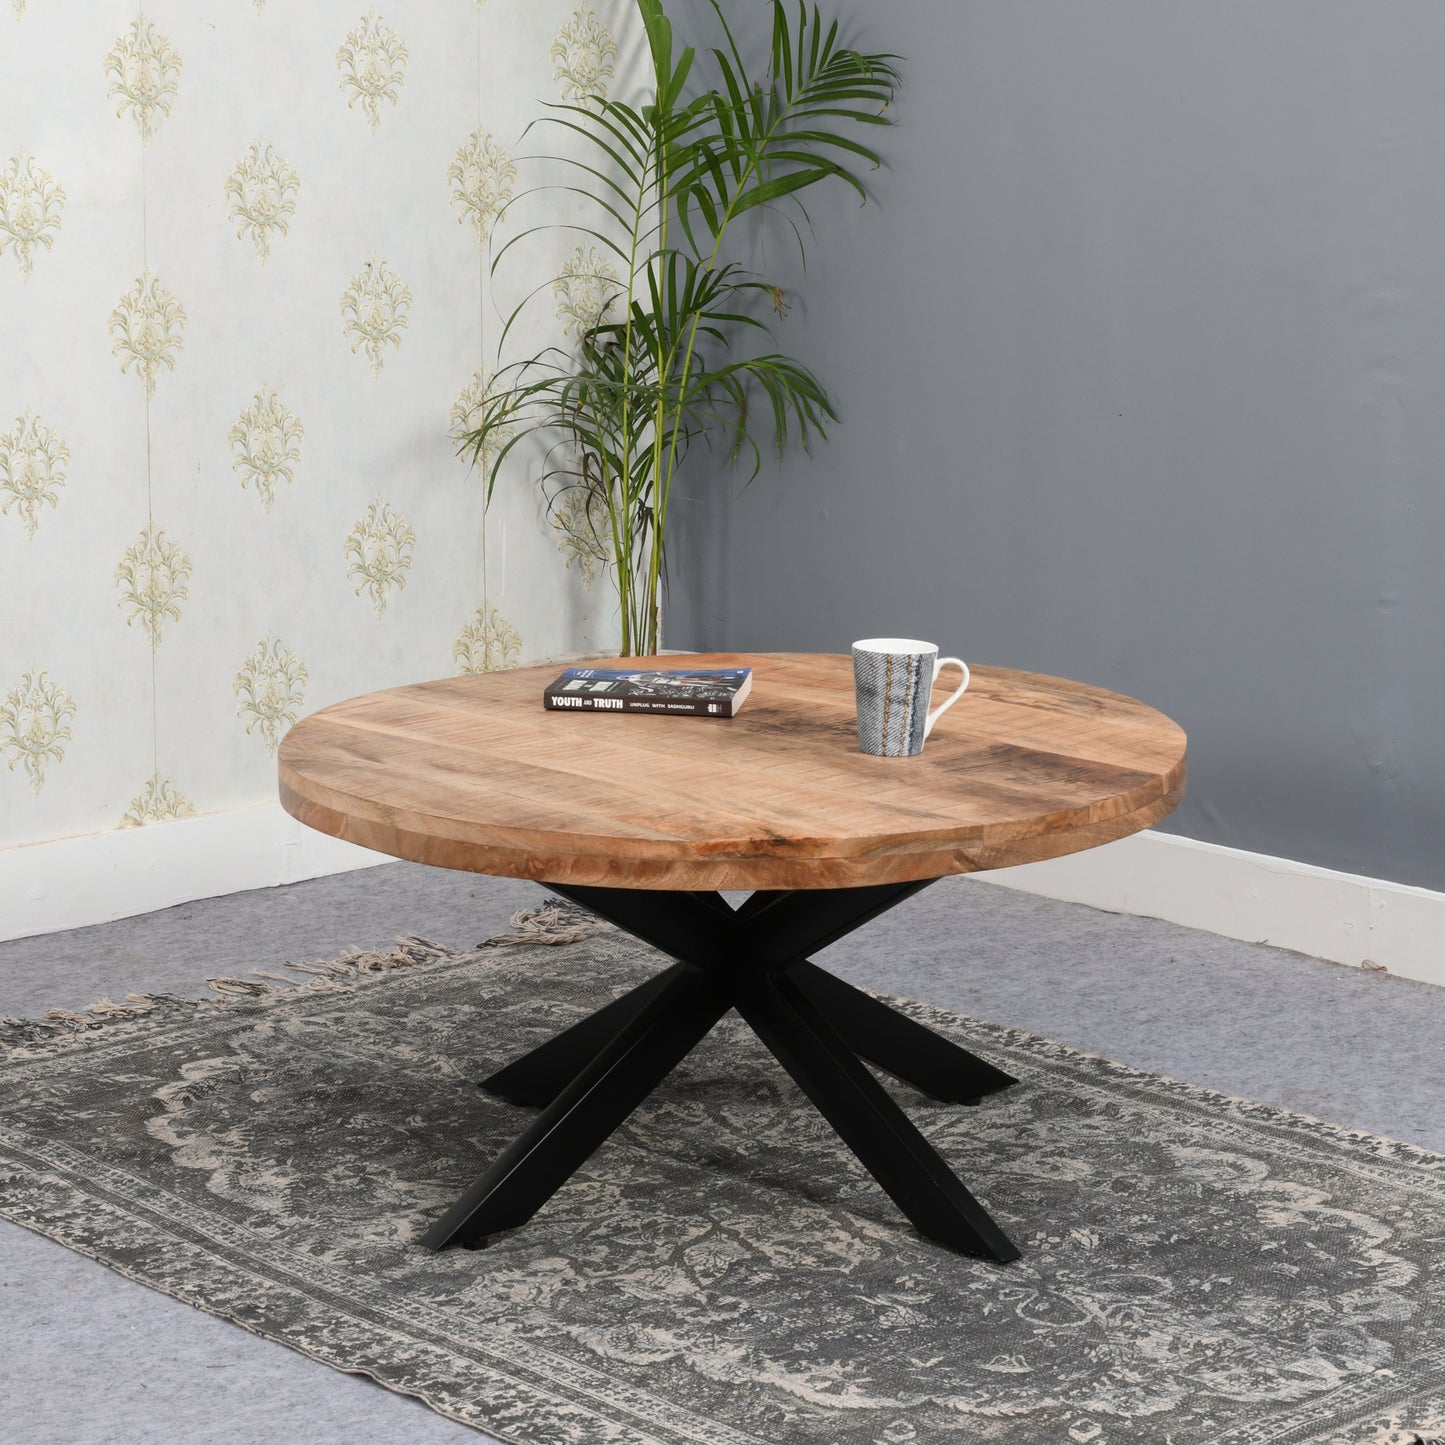 Surrey Solid Wood Coffee Table With Metal Spider Legs